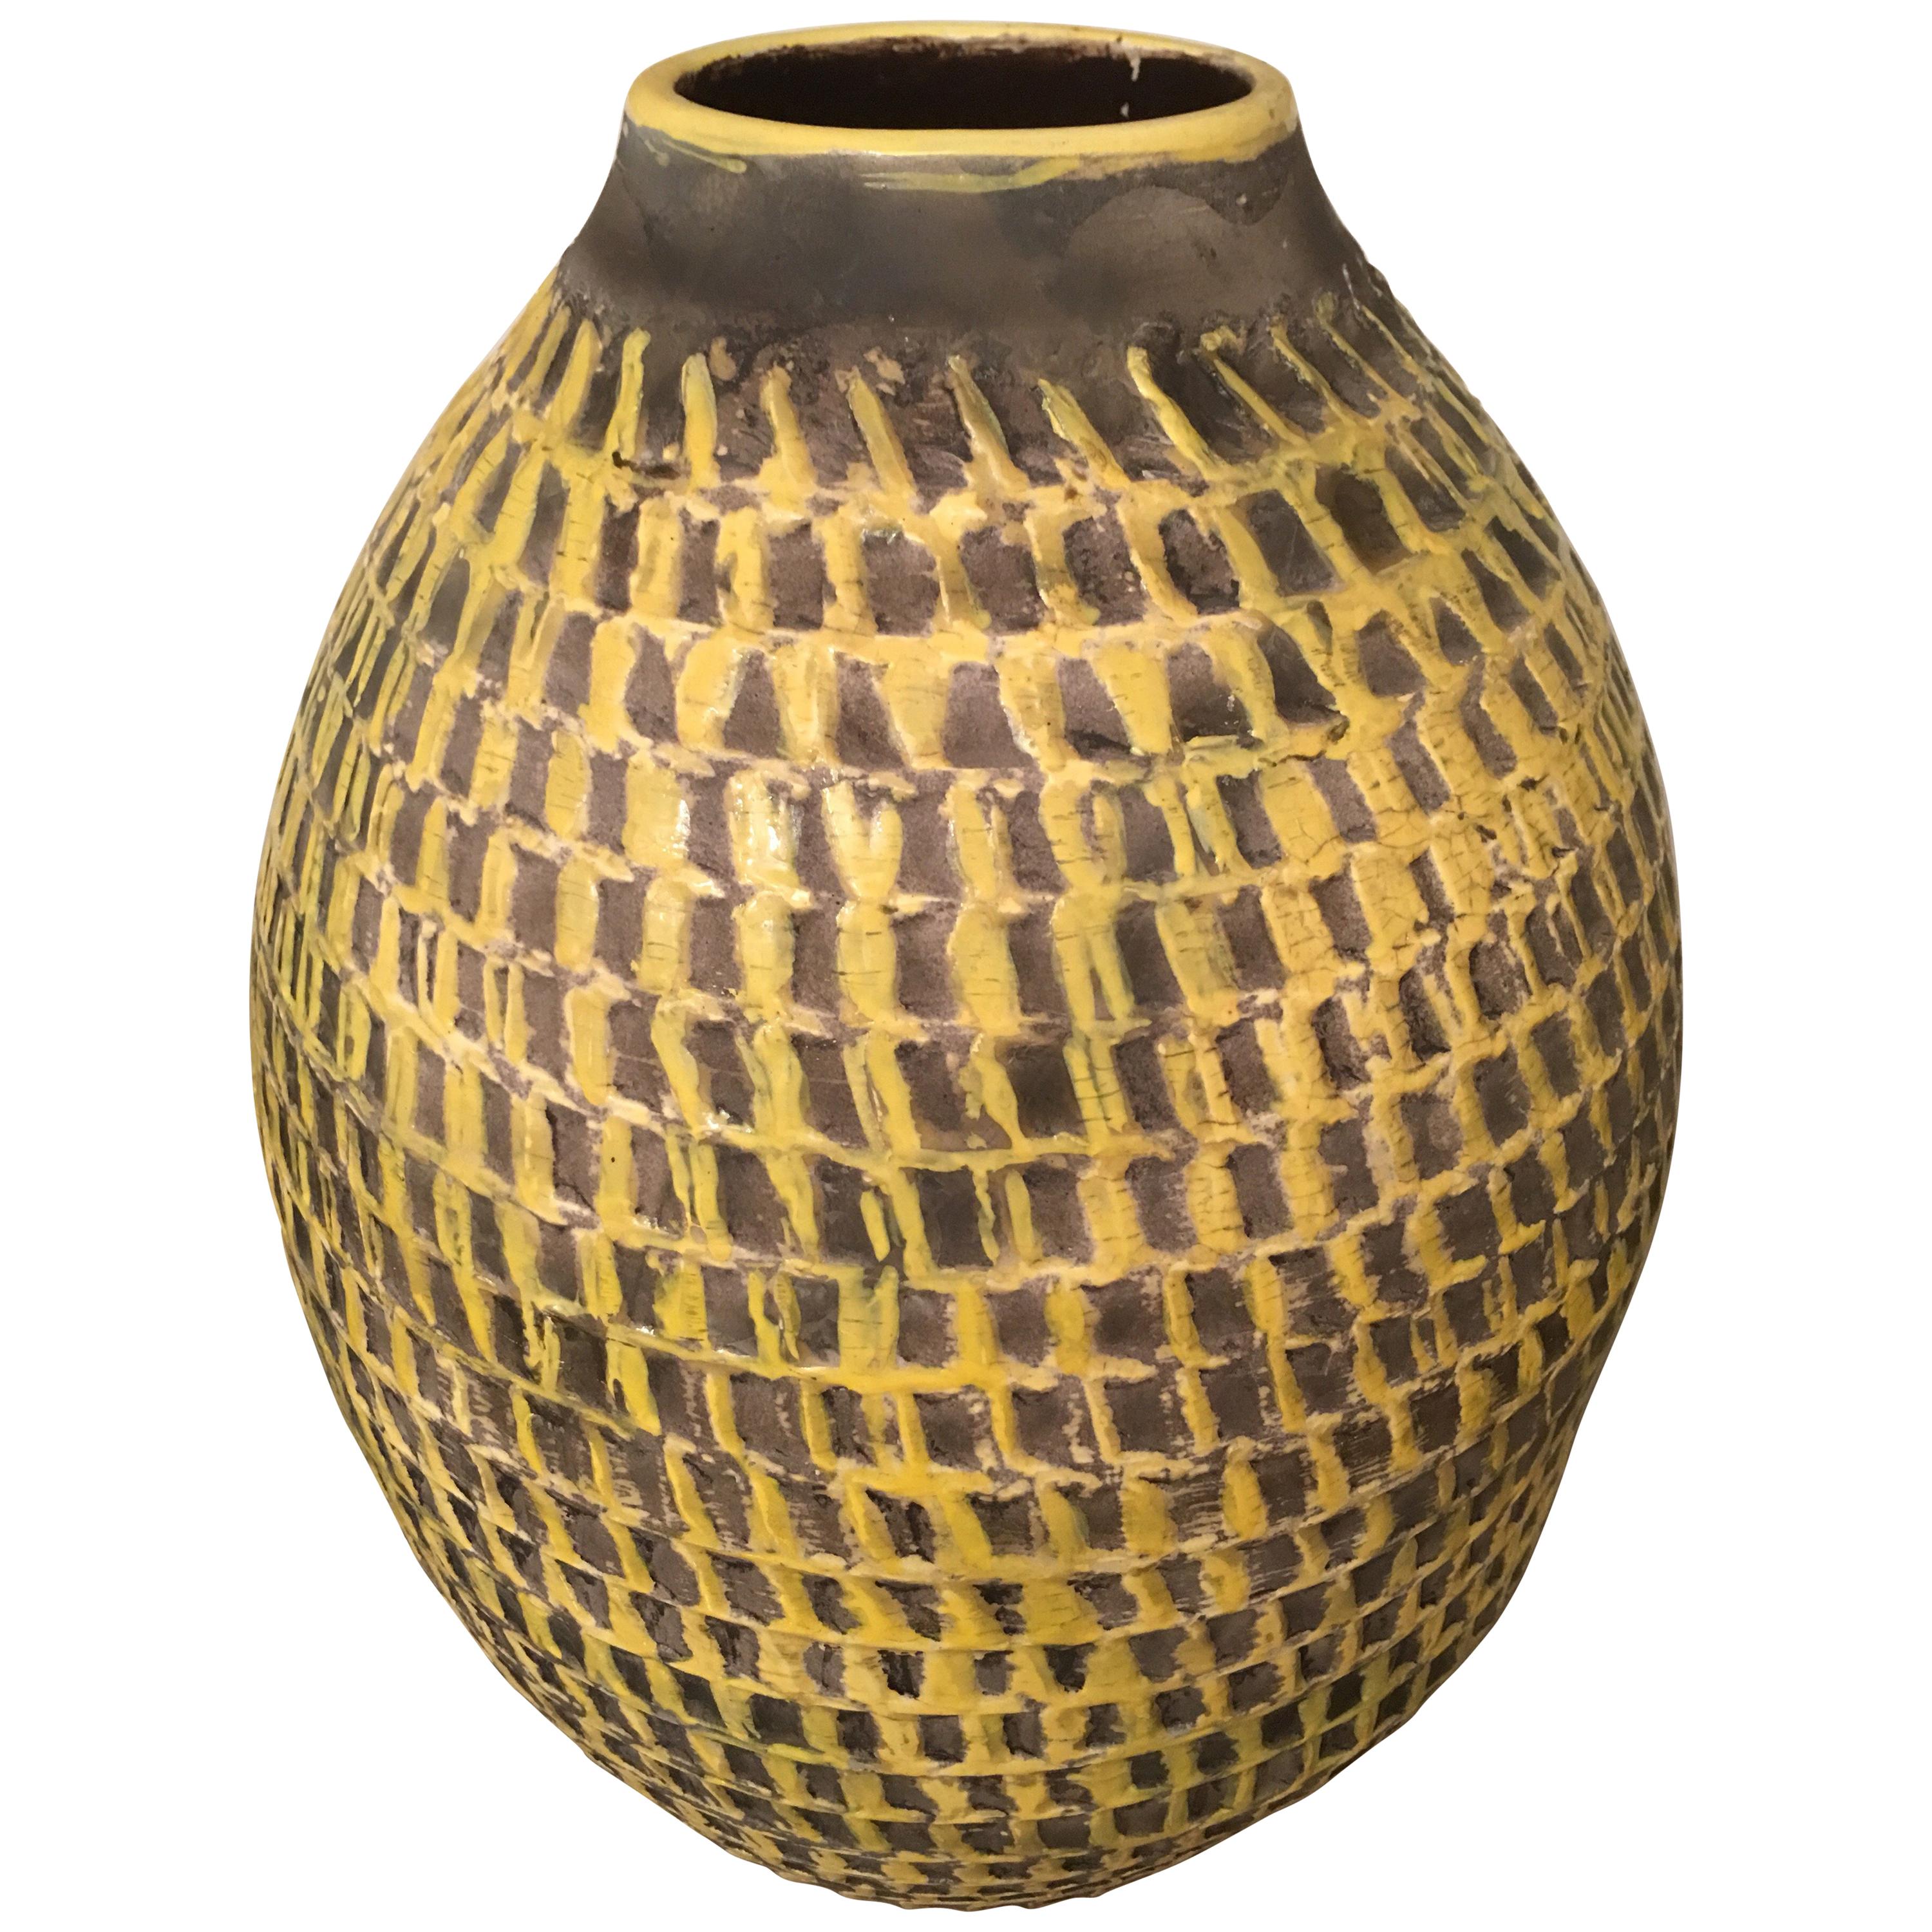 Jean Besnard Signed Large Yellow Ceramic Vase, Incised Decor, French, 1930s For Sale